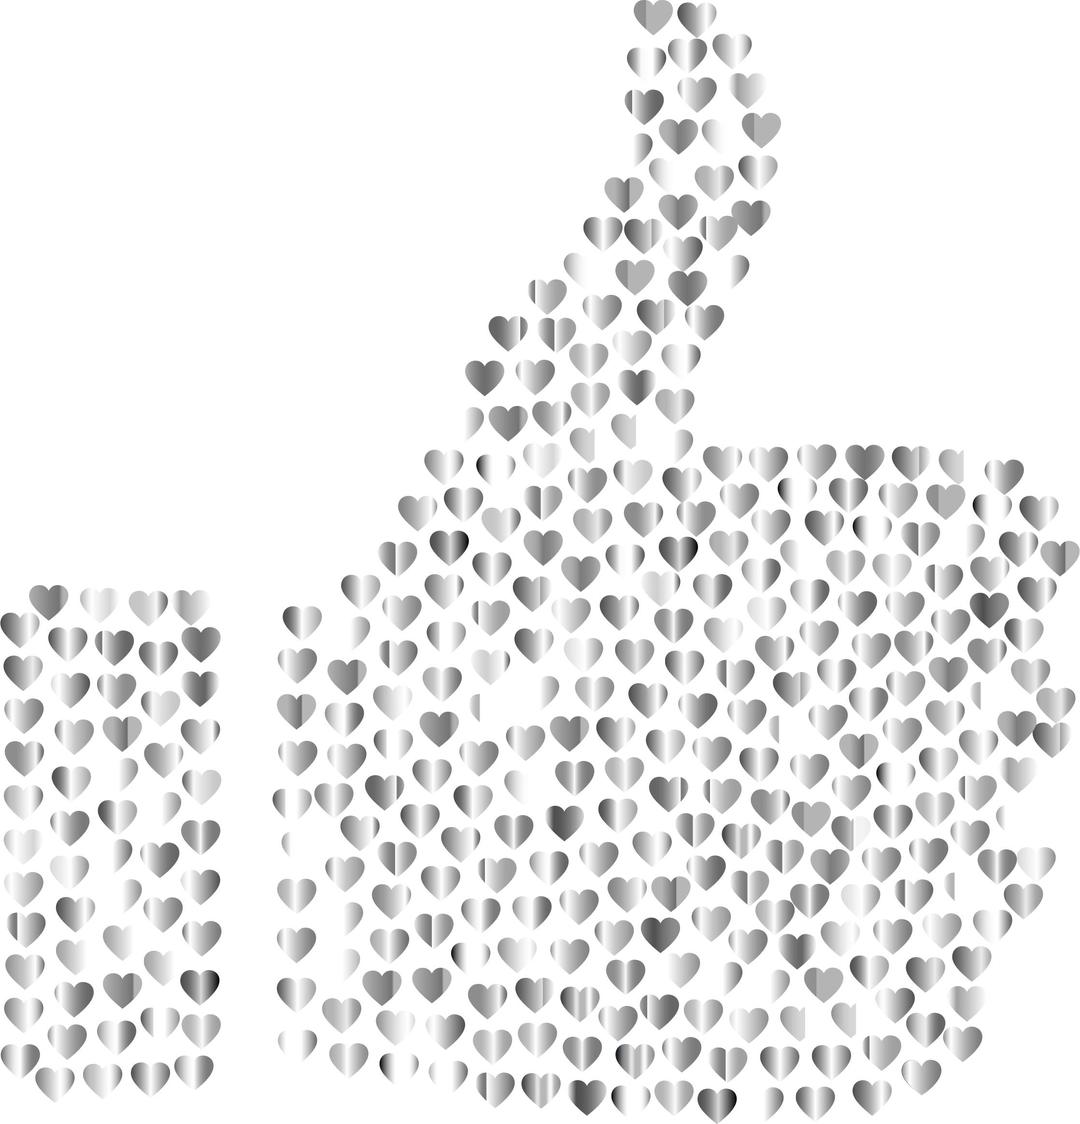 Prismatic Hearts Thumbs Up Silhouette 5 No Background png transparent